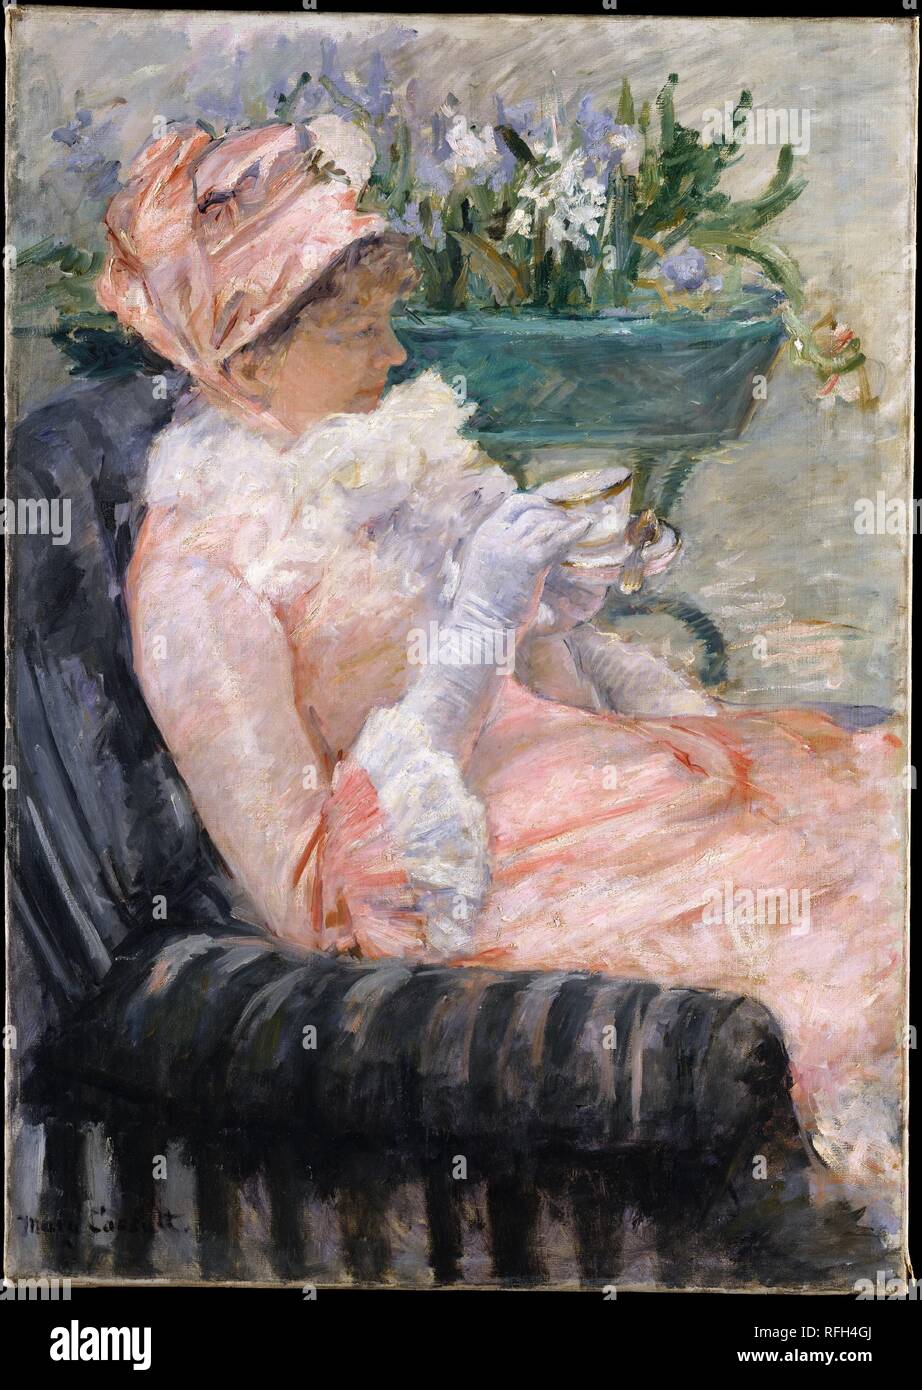 The Cup of Tea. Artist: Mary Cassatt (American, Pittsburgh, Pennsylvania 1844-1926 Le Mesnil-Théribus, Oise). Dimensions: 36 3/8 x 25 3/4 in. (92.4 x 65.4 cm). Date: ca. 1880-81.  Taking afternoon tea was a social ritual for many upper-middle-class women. Committed to portraying the ordinary events of everyday life, the artist made that ritual the subject of a series of works painted around 1880, when she had been living abroad for the better part of a decade. Her model for this canvas was her sister, Lydia, who had moved to Paris, along with their parents, in 1877 and often posed for her. Cas Stock Photo